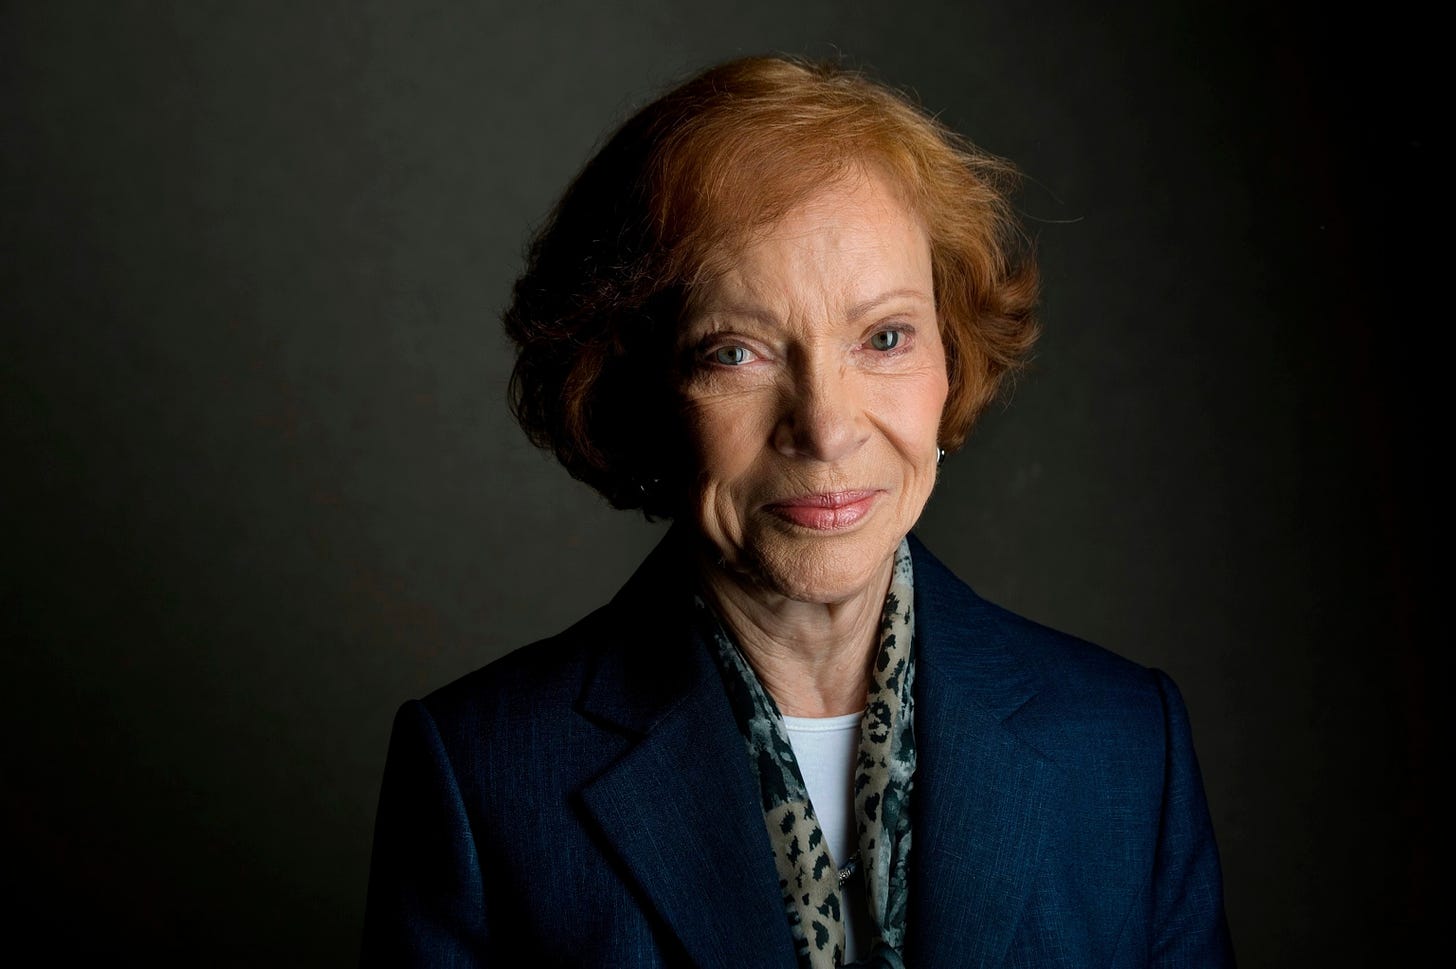 Author looks back at former first lady Rosalynn Carter's legacy - ABC News